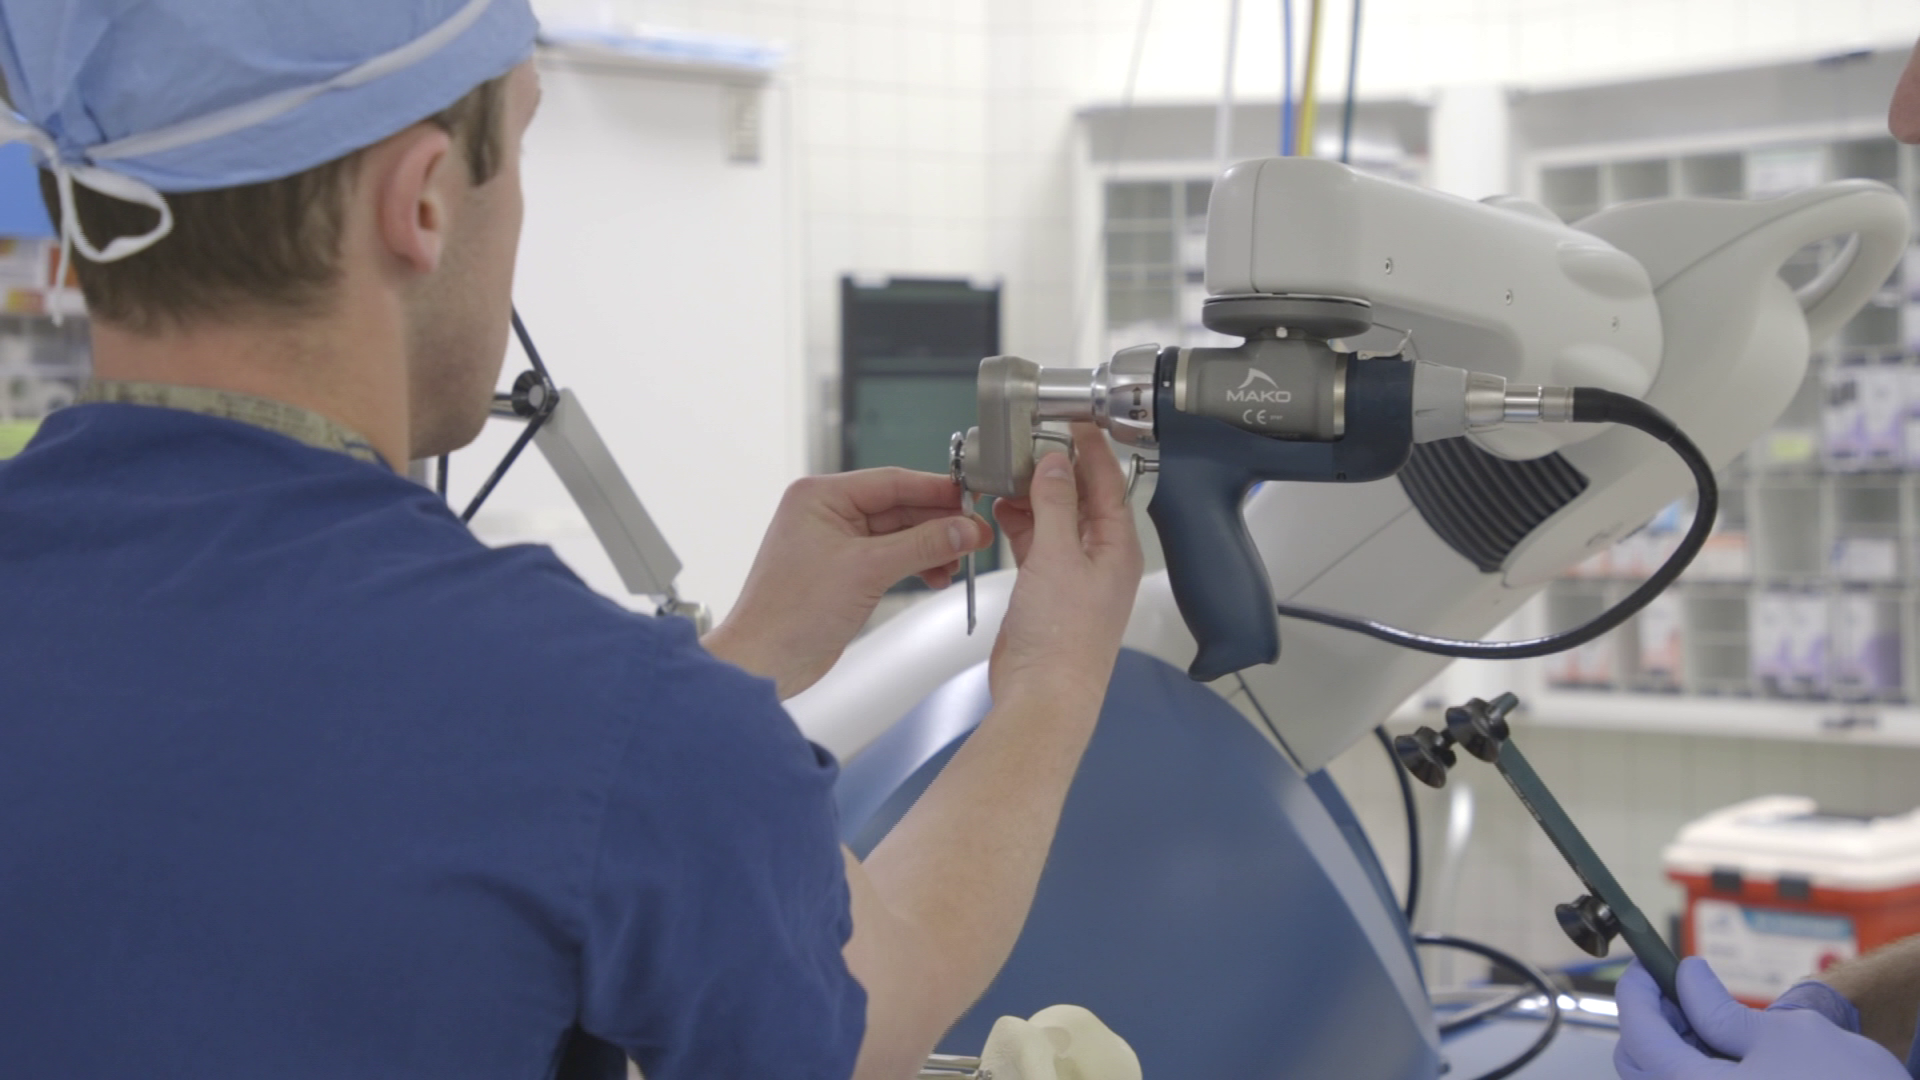 A new robotic tool is helping surgeons at Munson Traverse City perform knee and hip surgeries